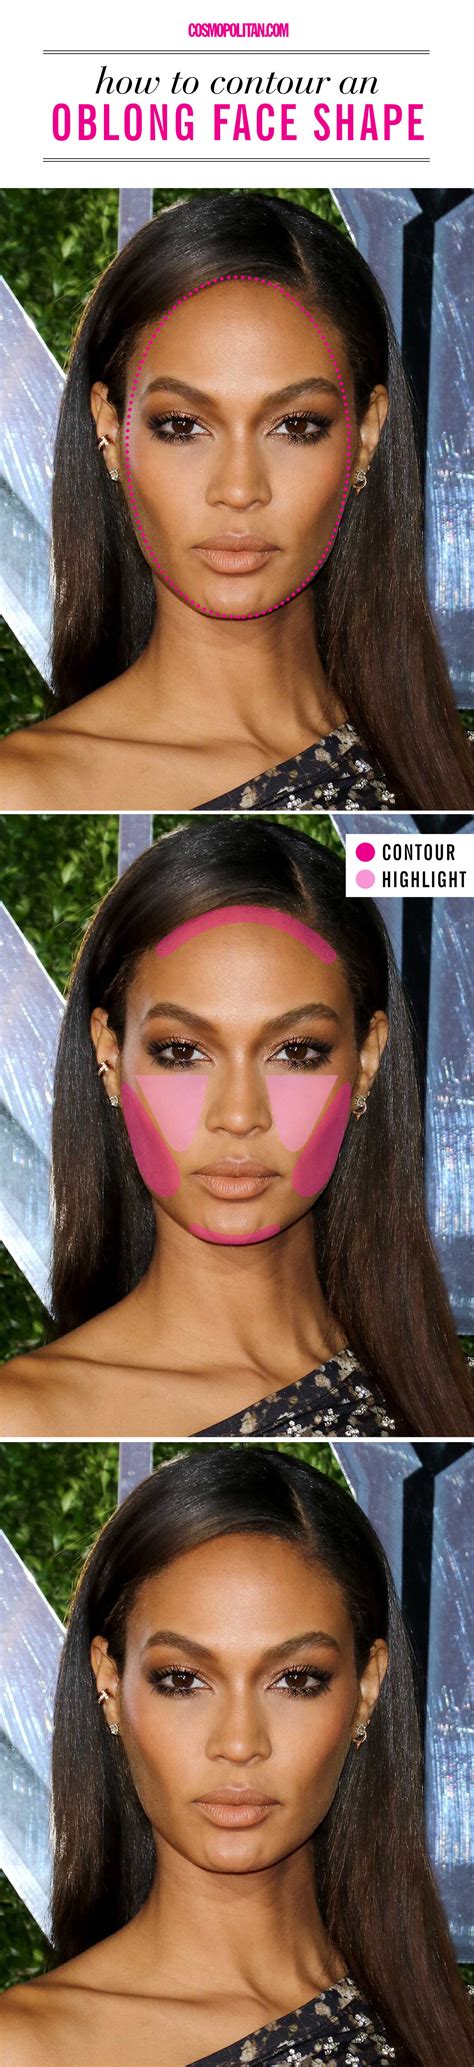 By leaving the chin free of contour, it will help to add more height to your face, creating the illusion of a longer, more oval face shape. The Right Way to Contour for Your Face Shape | Contour makeup, Oblong face shape, Face shapes